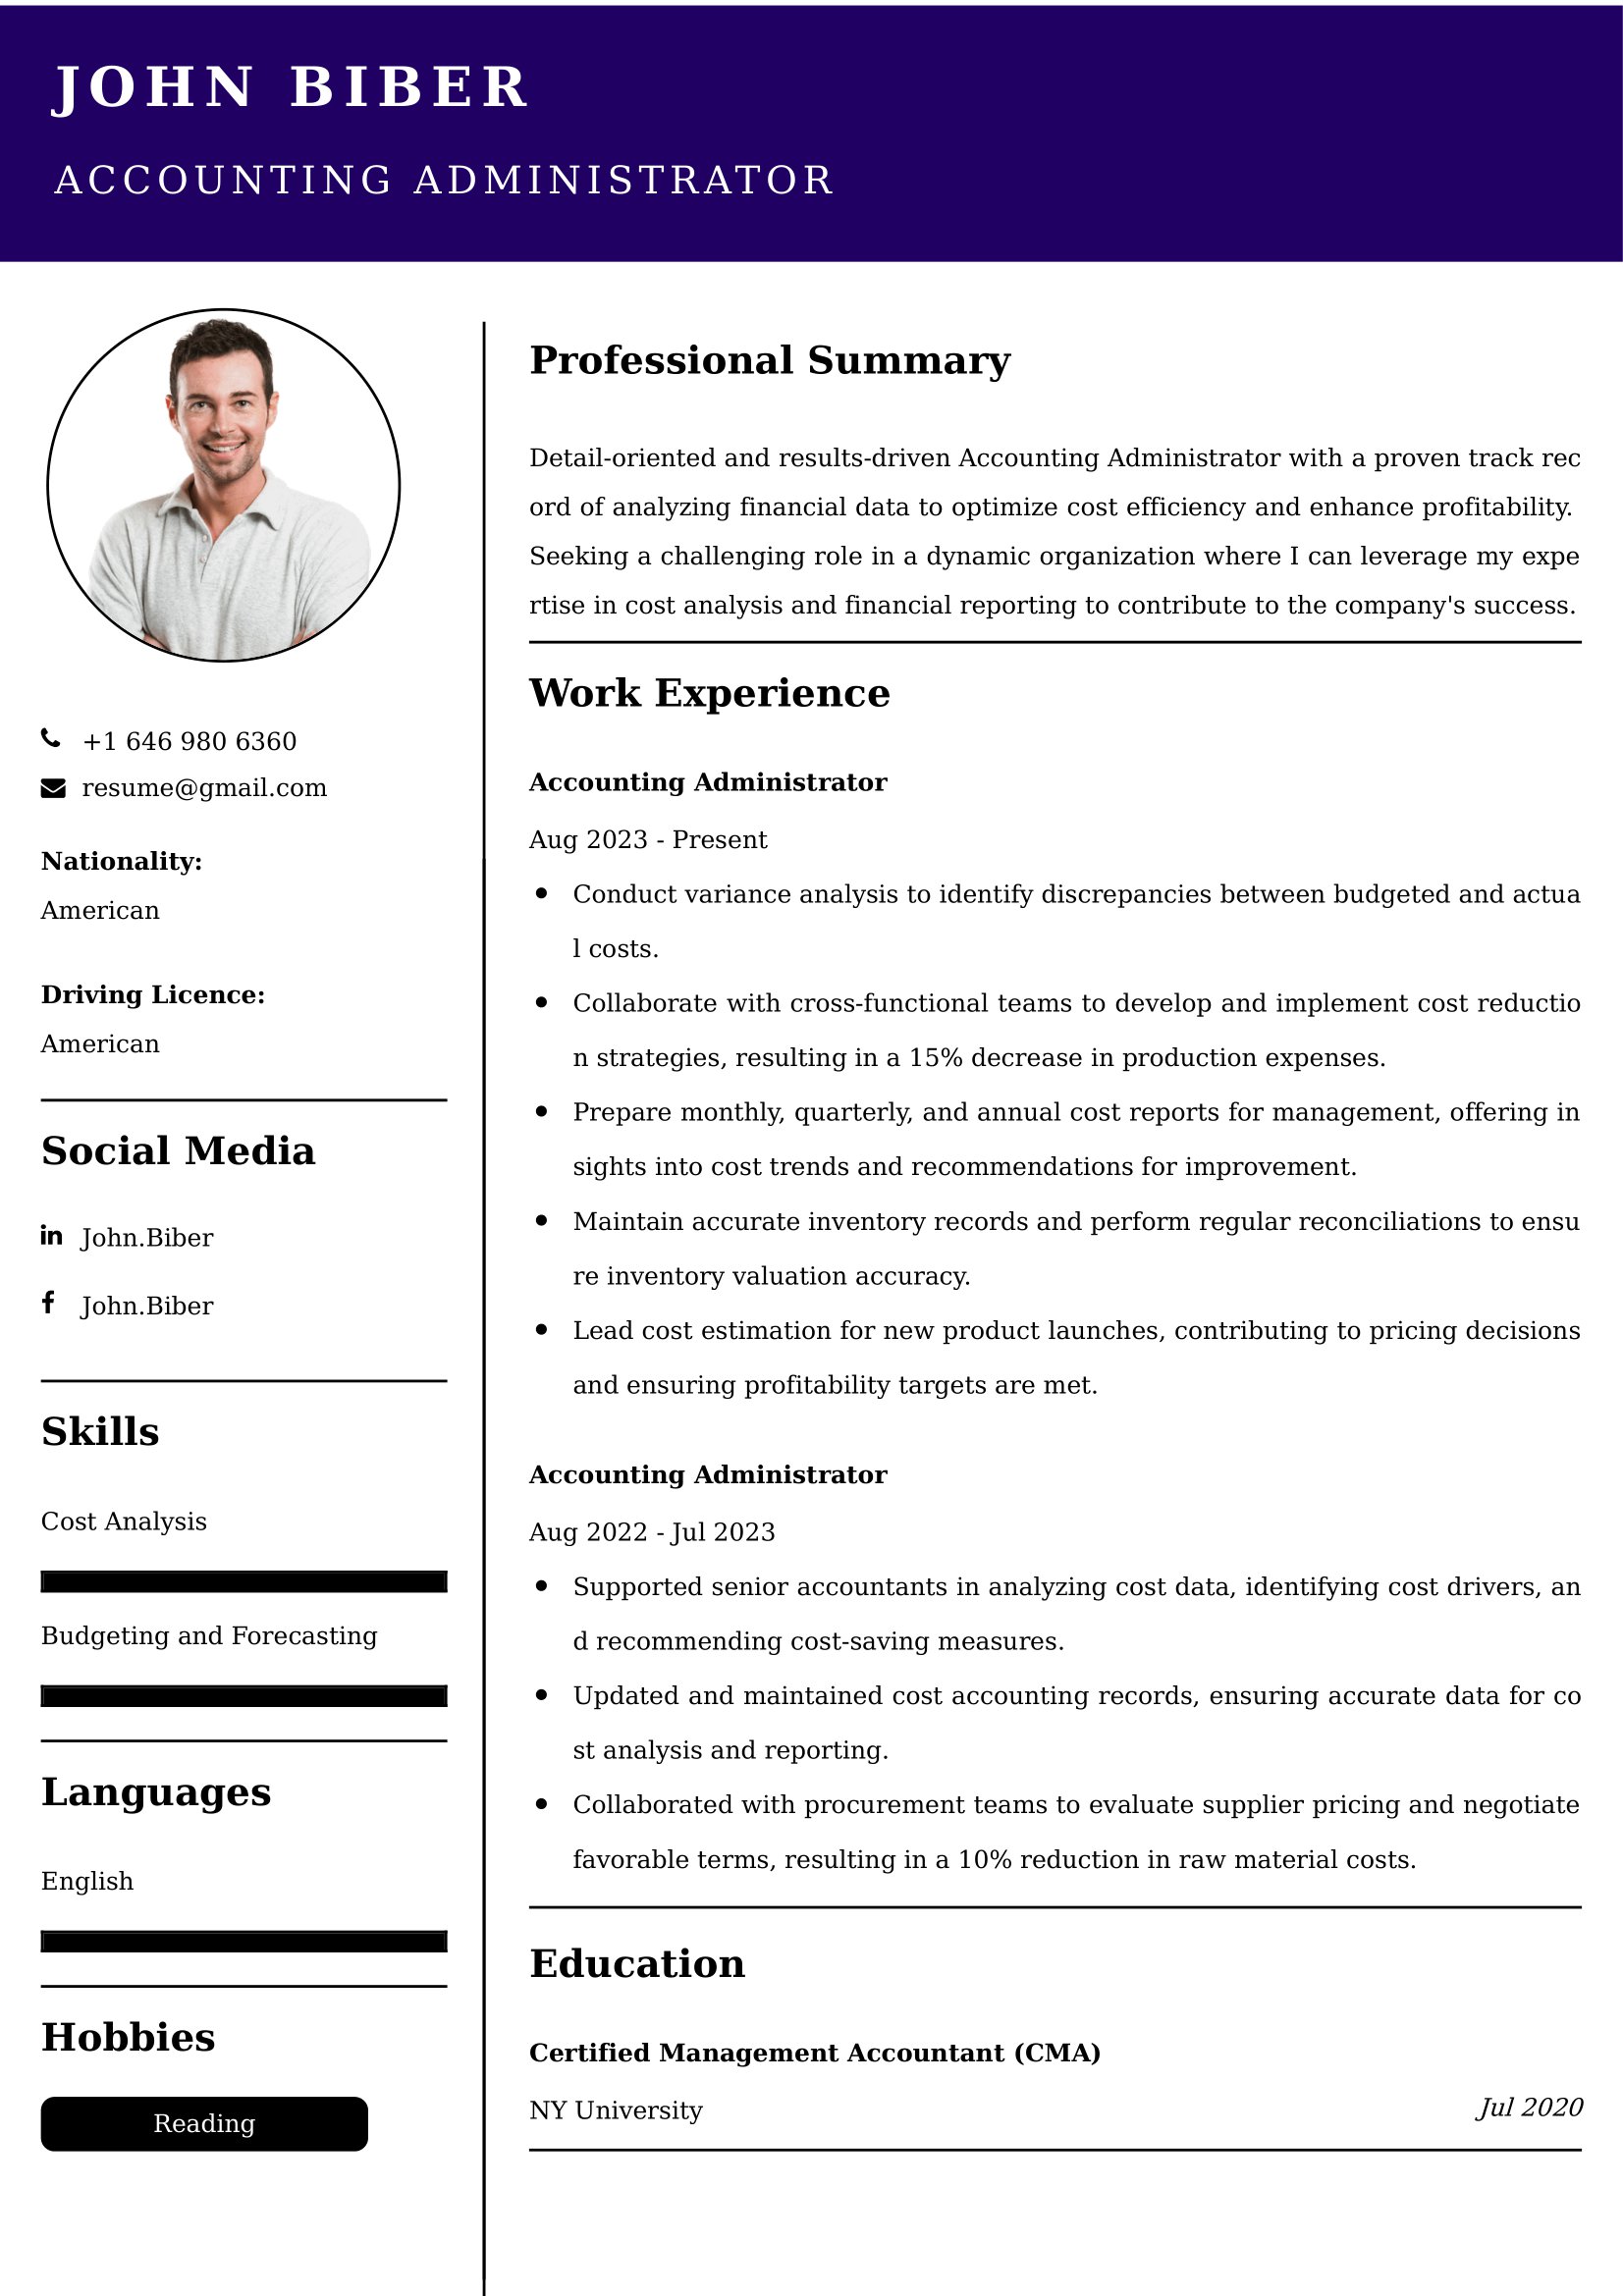 Accounting Administrator Resume Examples - UK Format, Latest Template.